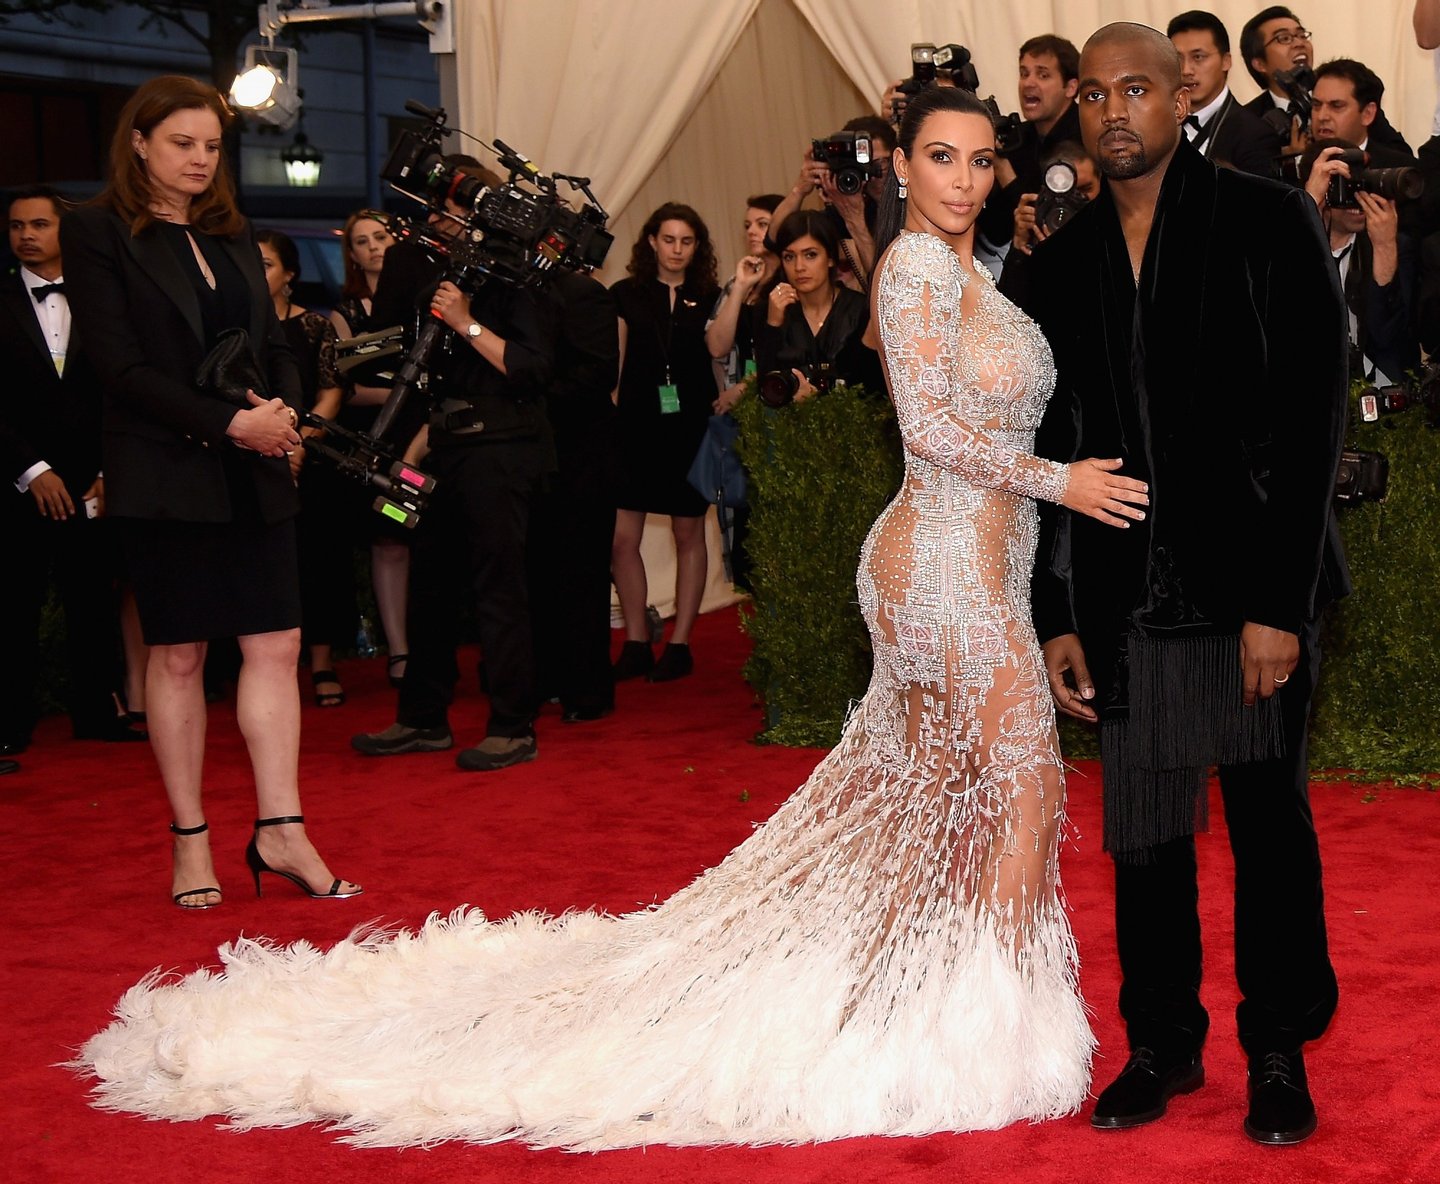 NEW YORK, NY - MAY 04: Kim Kardashian West (L) and Kanye West attend the "China: Through The Looking Glass" Costume Institute Benefit Gala at the Metropolitan Museum of Art on May 4, 2015 in New York City. (Photo by Dimitrios Kambouris/Getty Images) *** Local Caption *** Kim Kardashian West; Kanye West